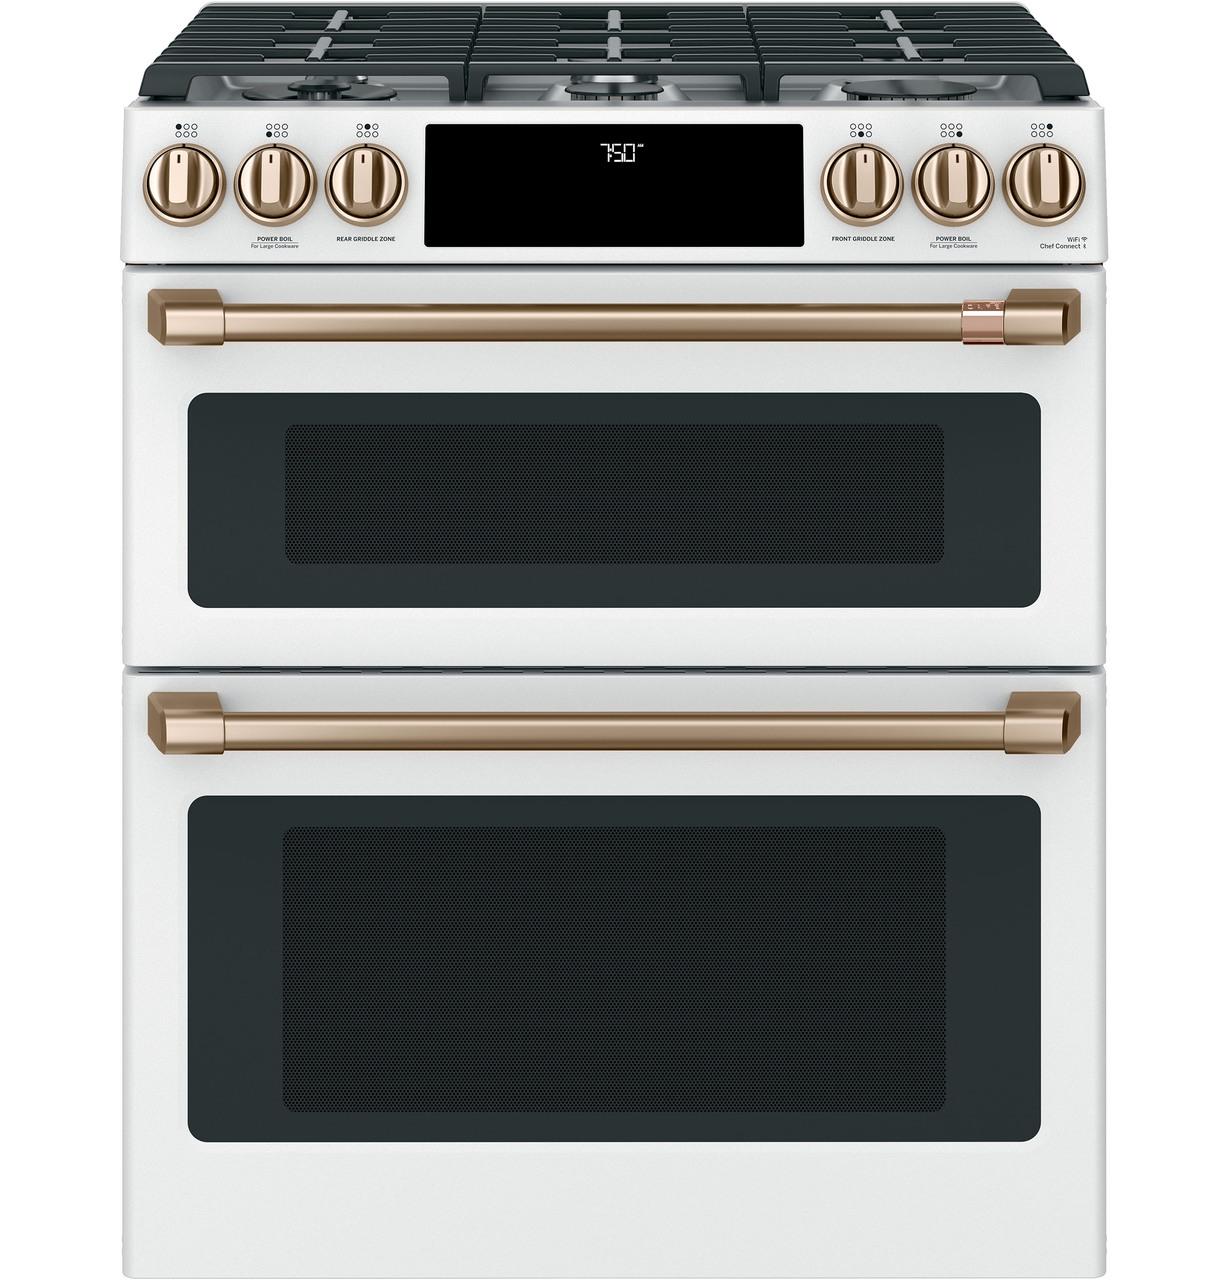 Cafe Caf(eback)™ 30" Smart Slide-In, Front-Control, Gas Double-Oven Range with Convection